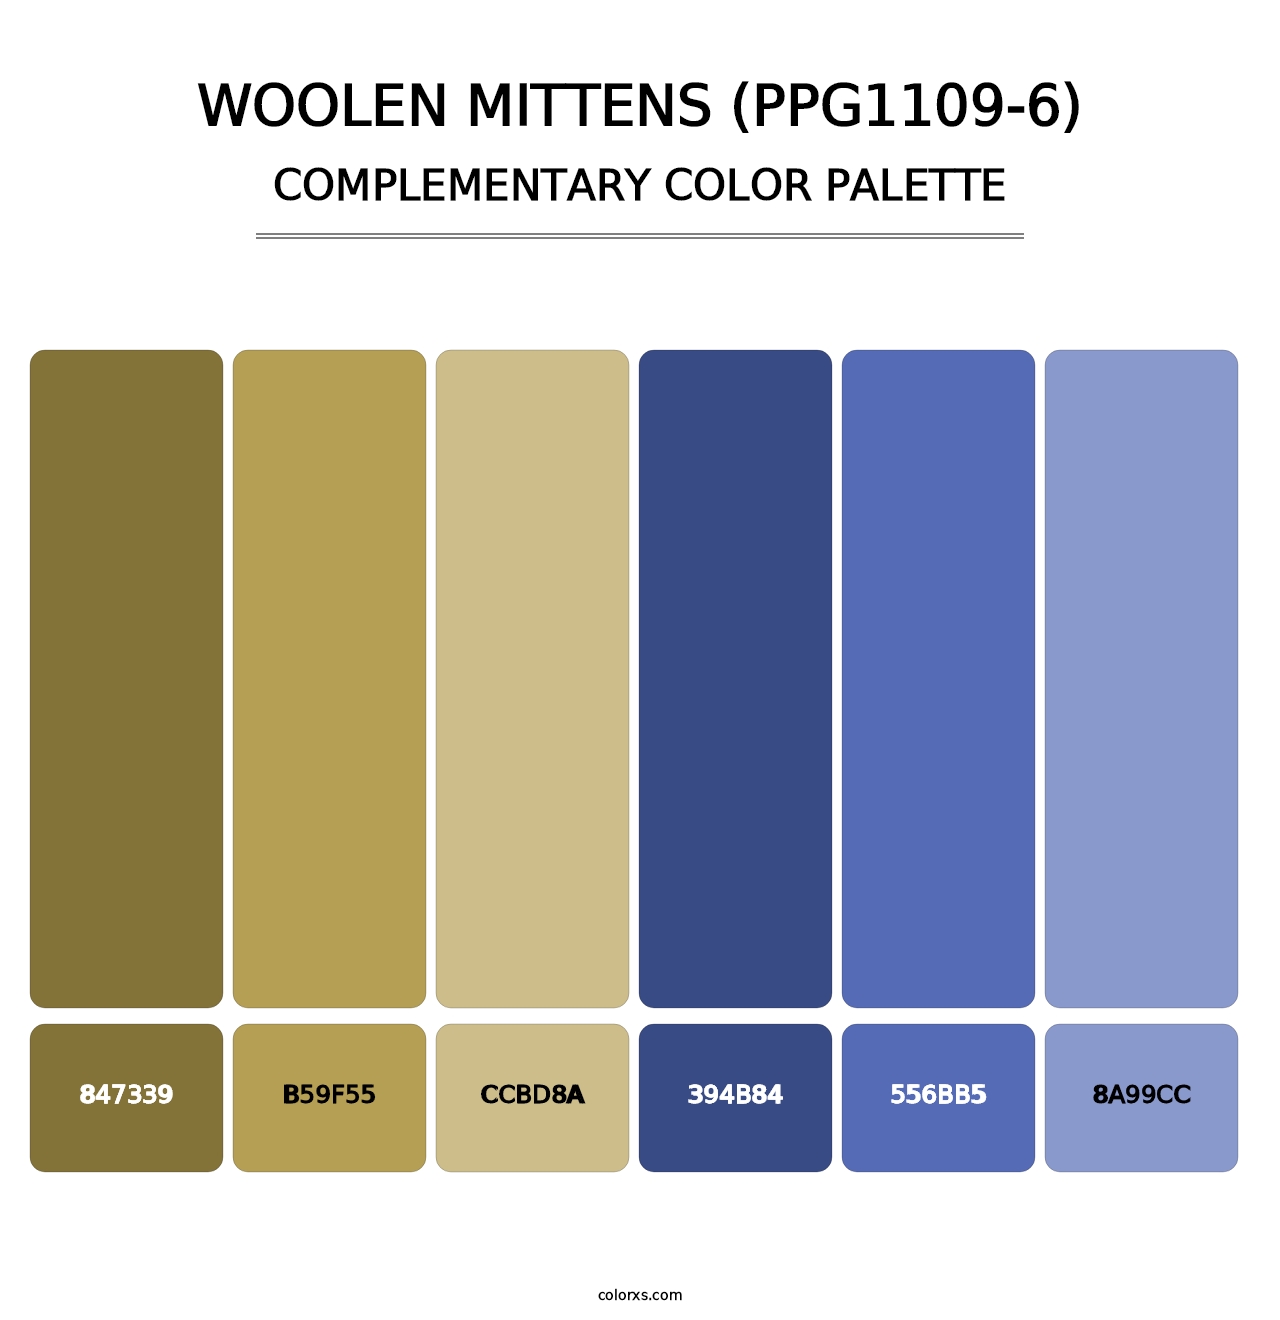 Woolen Mittens (PPG1109-6) - Complementary Color Palette